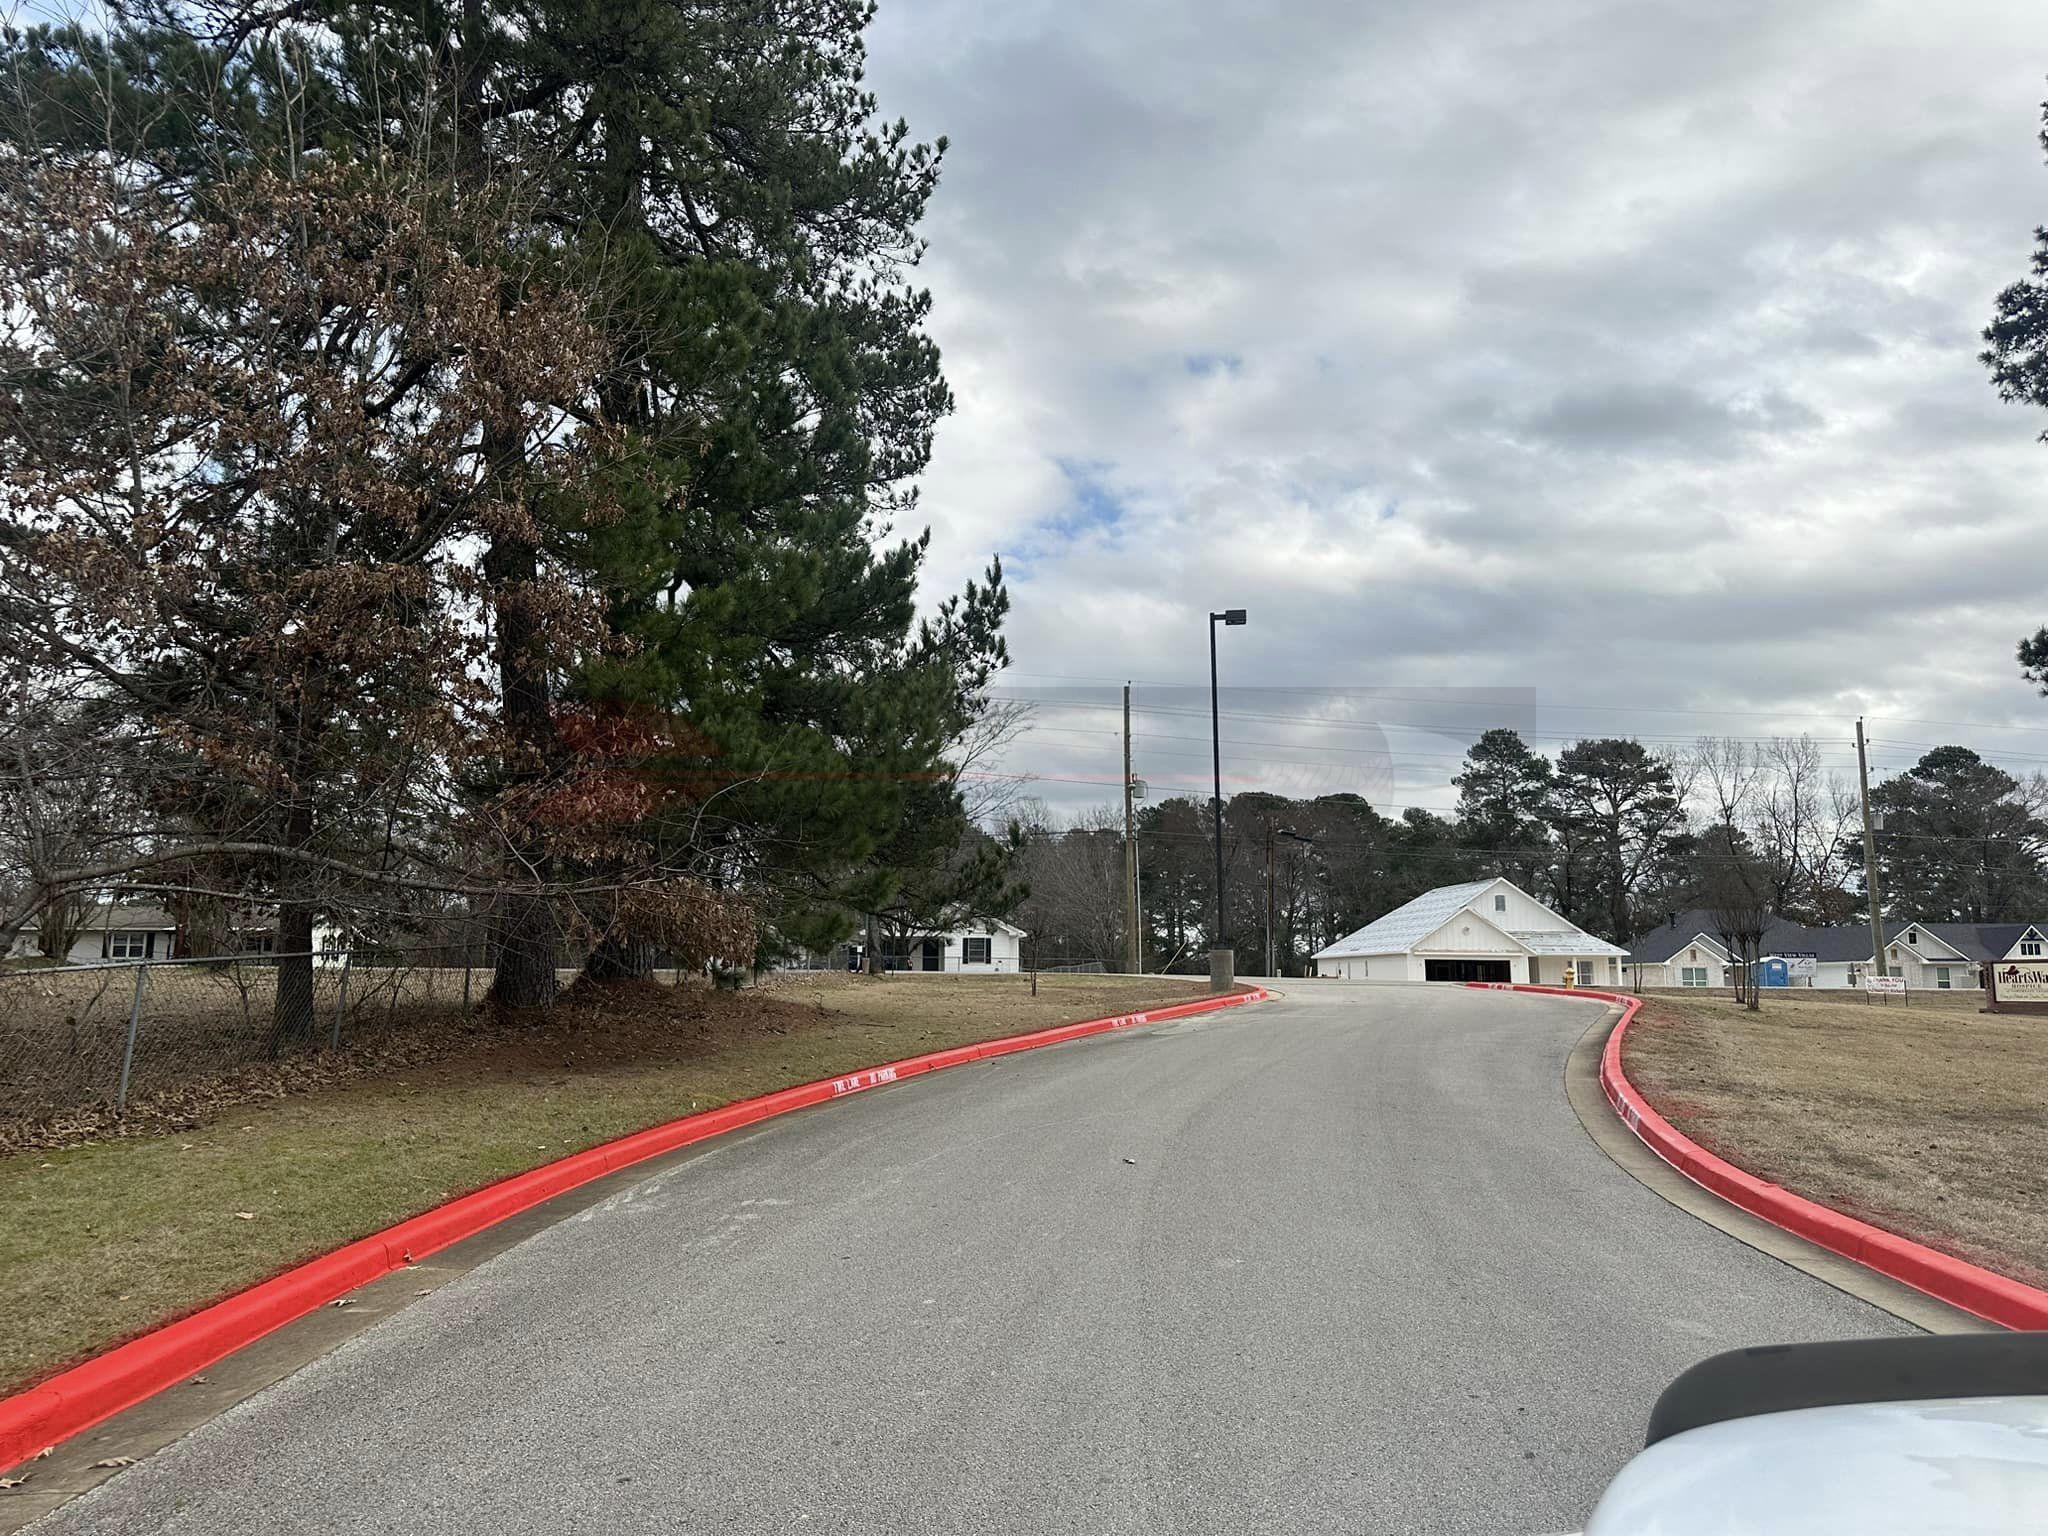 Fire Lane Striping for Heartsway Hospice in Mineola, Texas